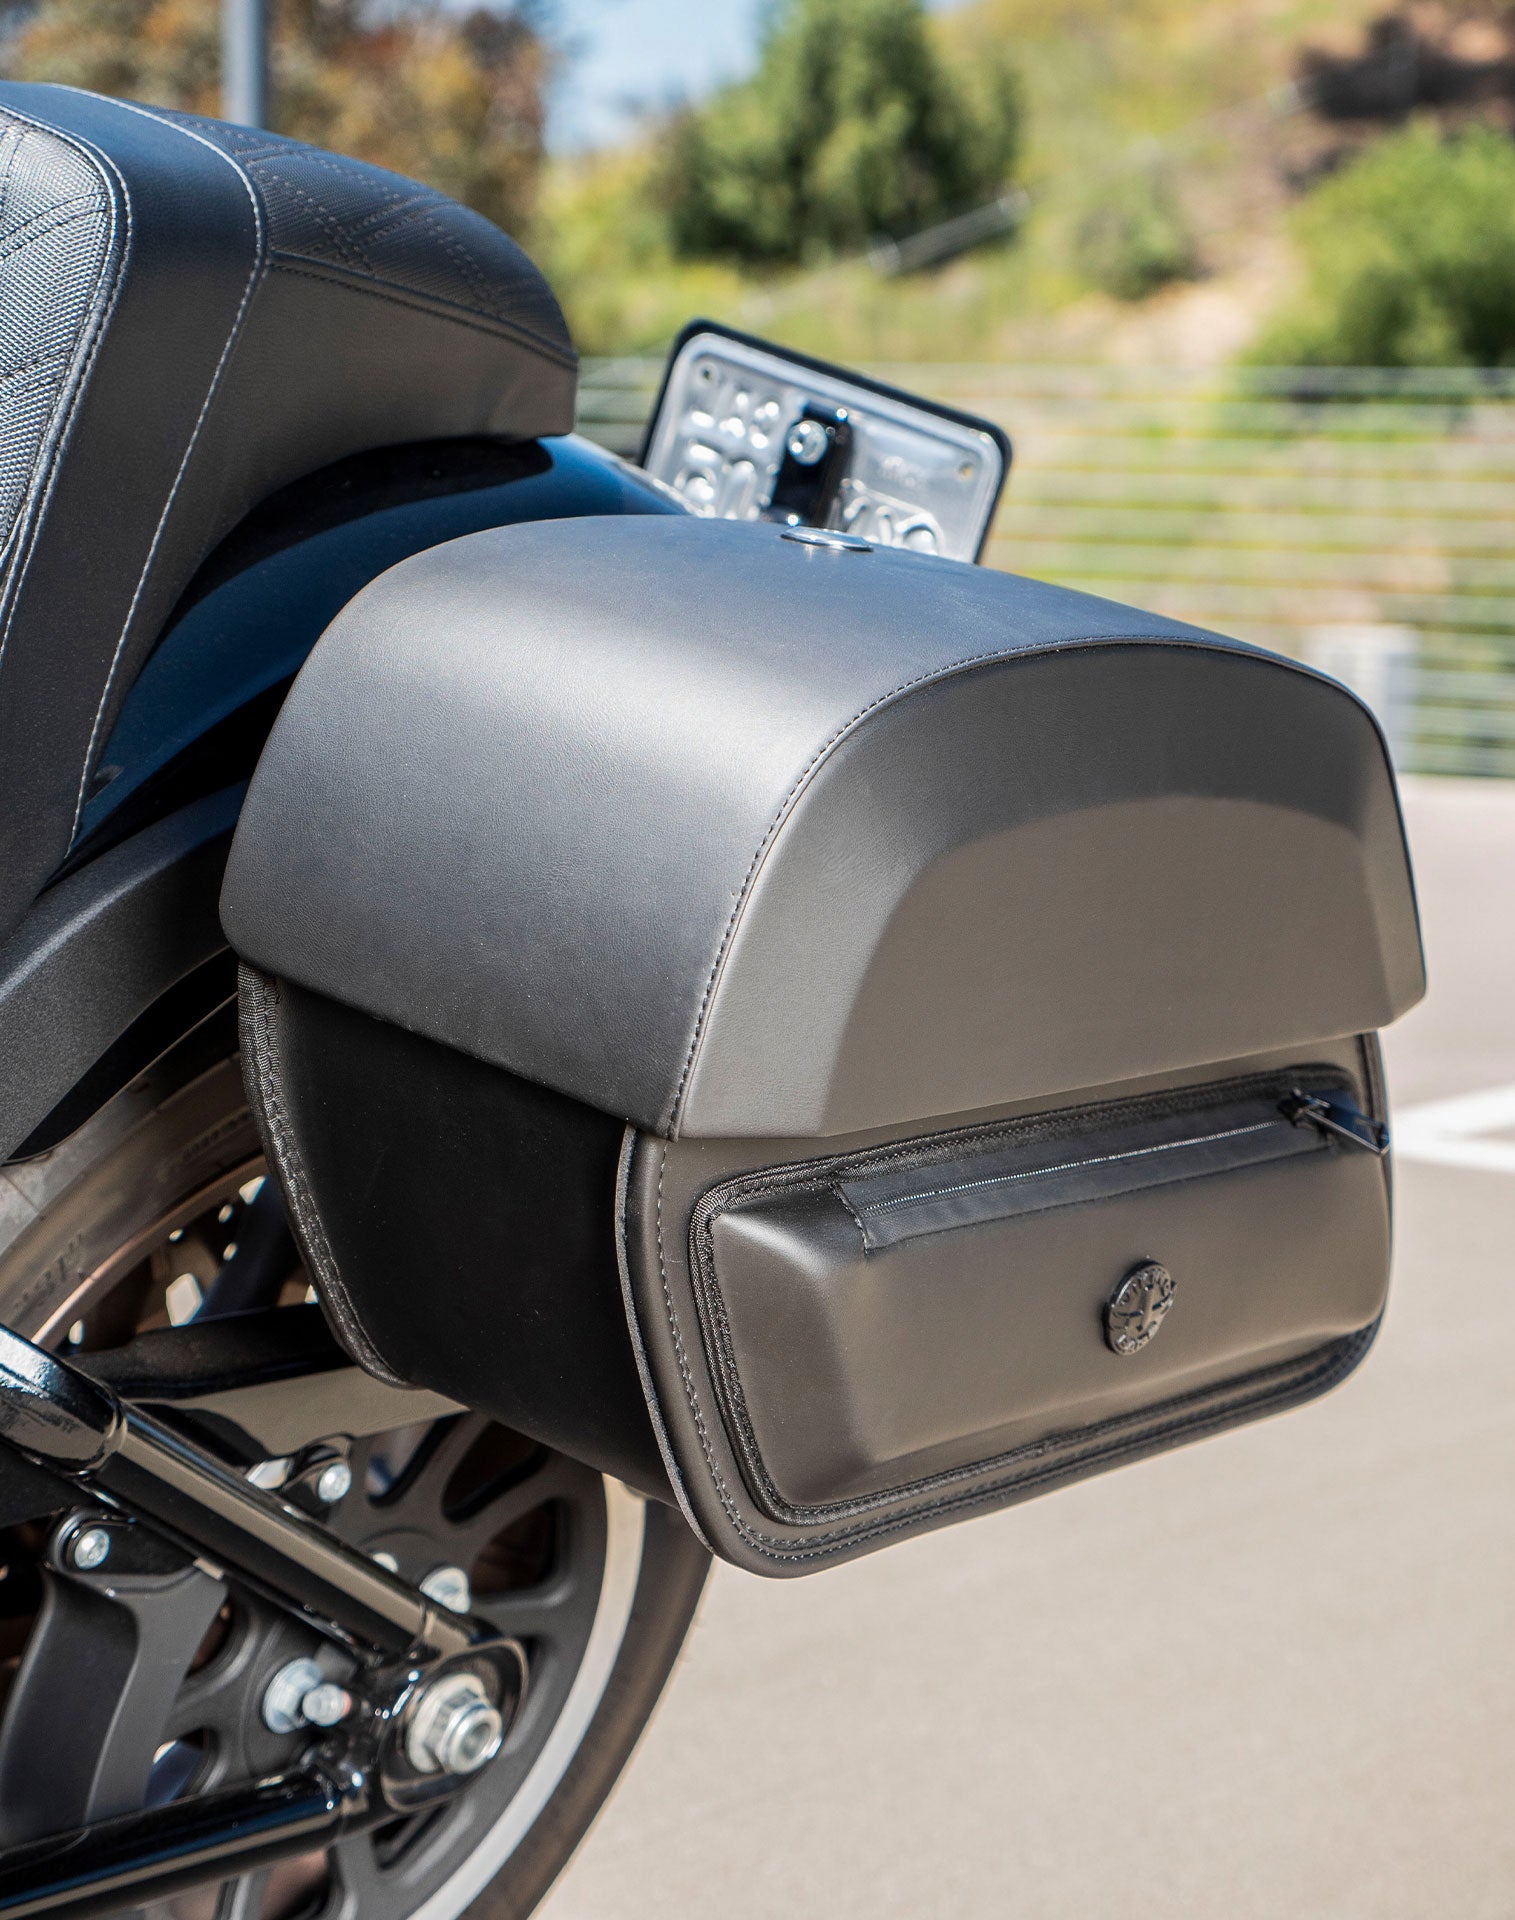 28L - Pantheon Medium Quick-Mount Motorcycle Saddlebags For Harley Softail Low Rider S FXLRS